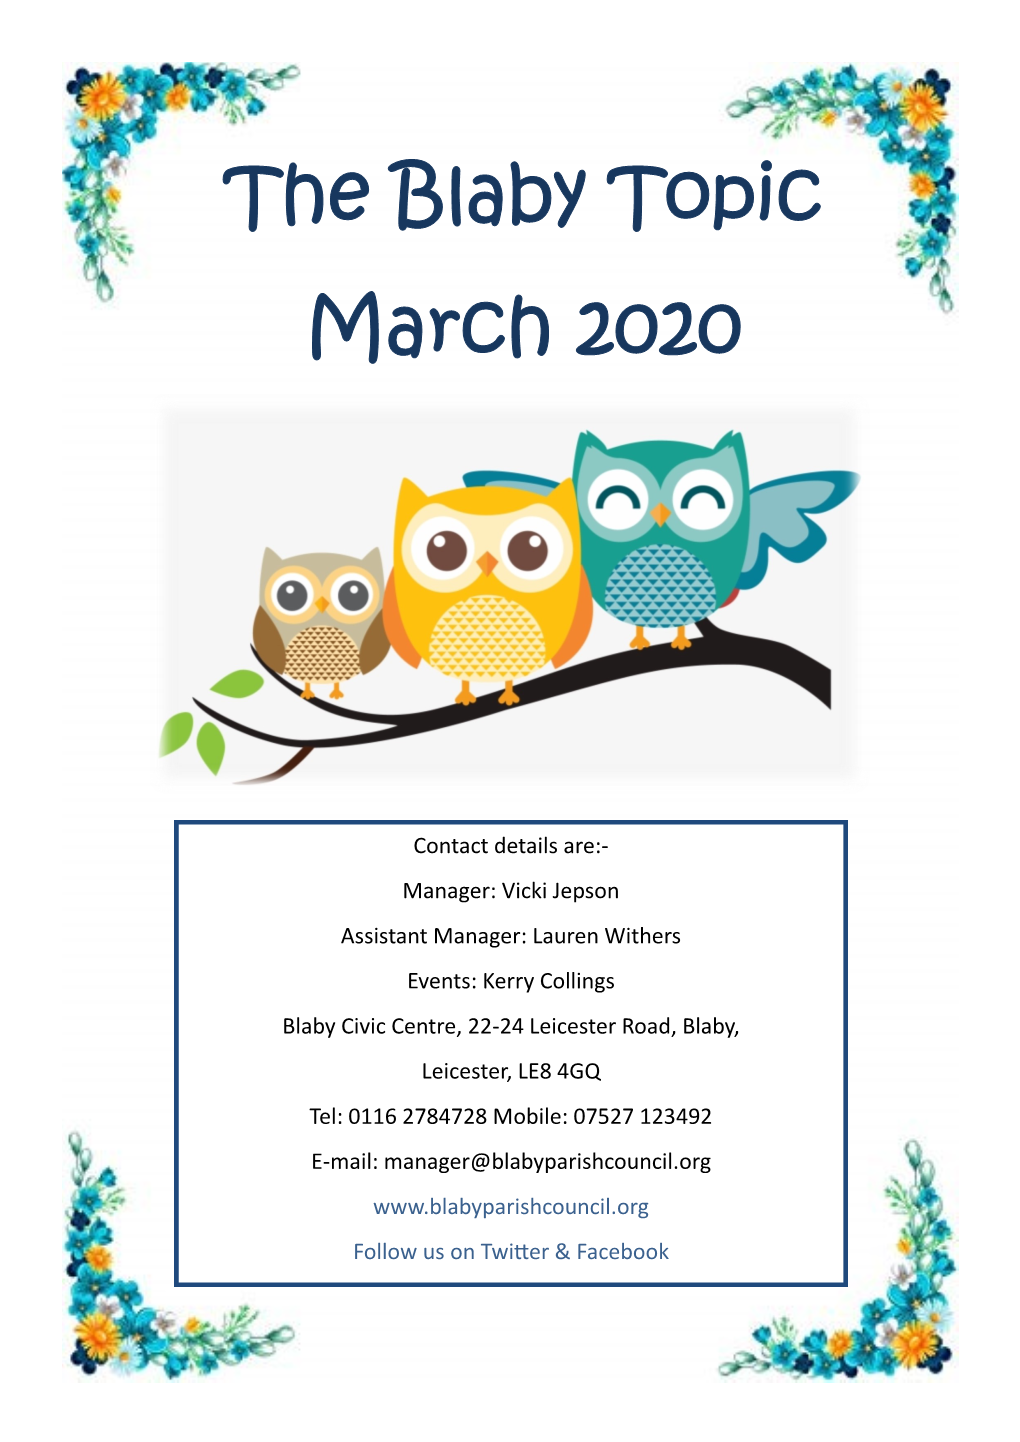 The Blaby Topic March 2020